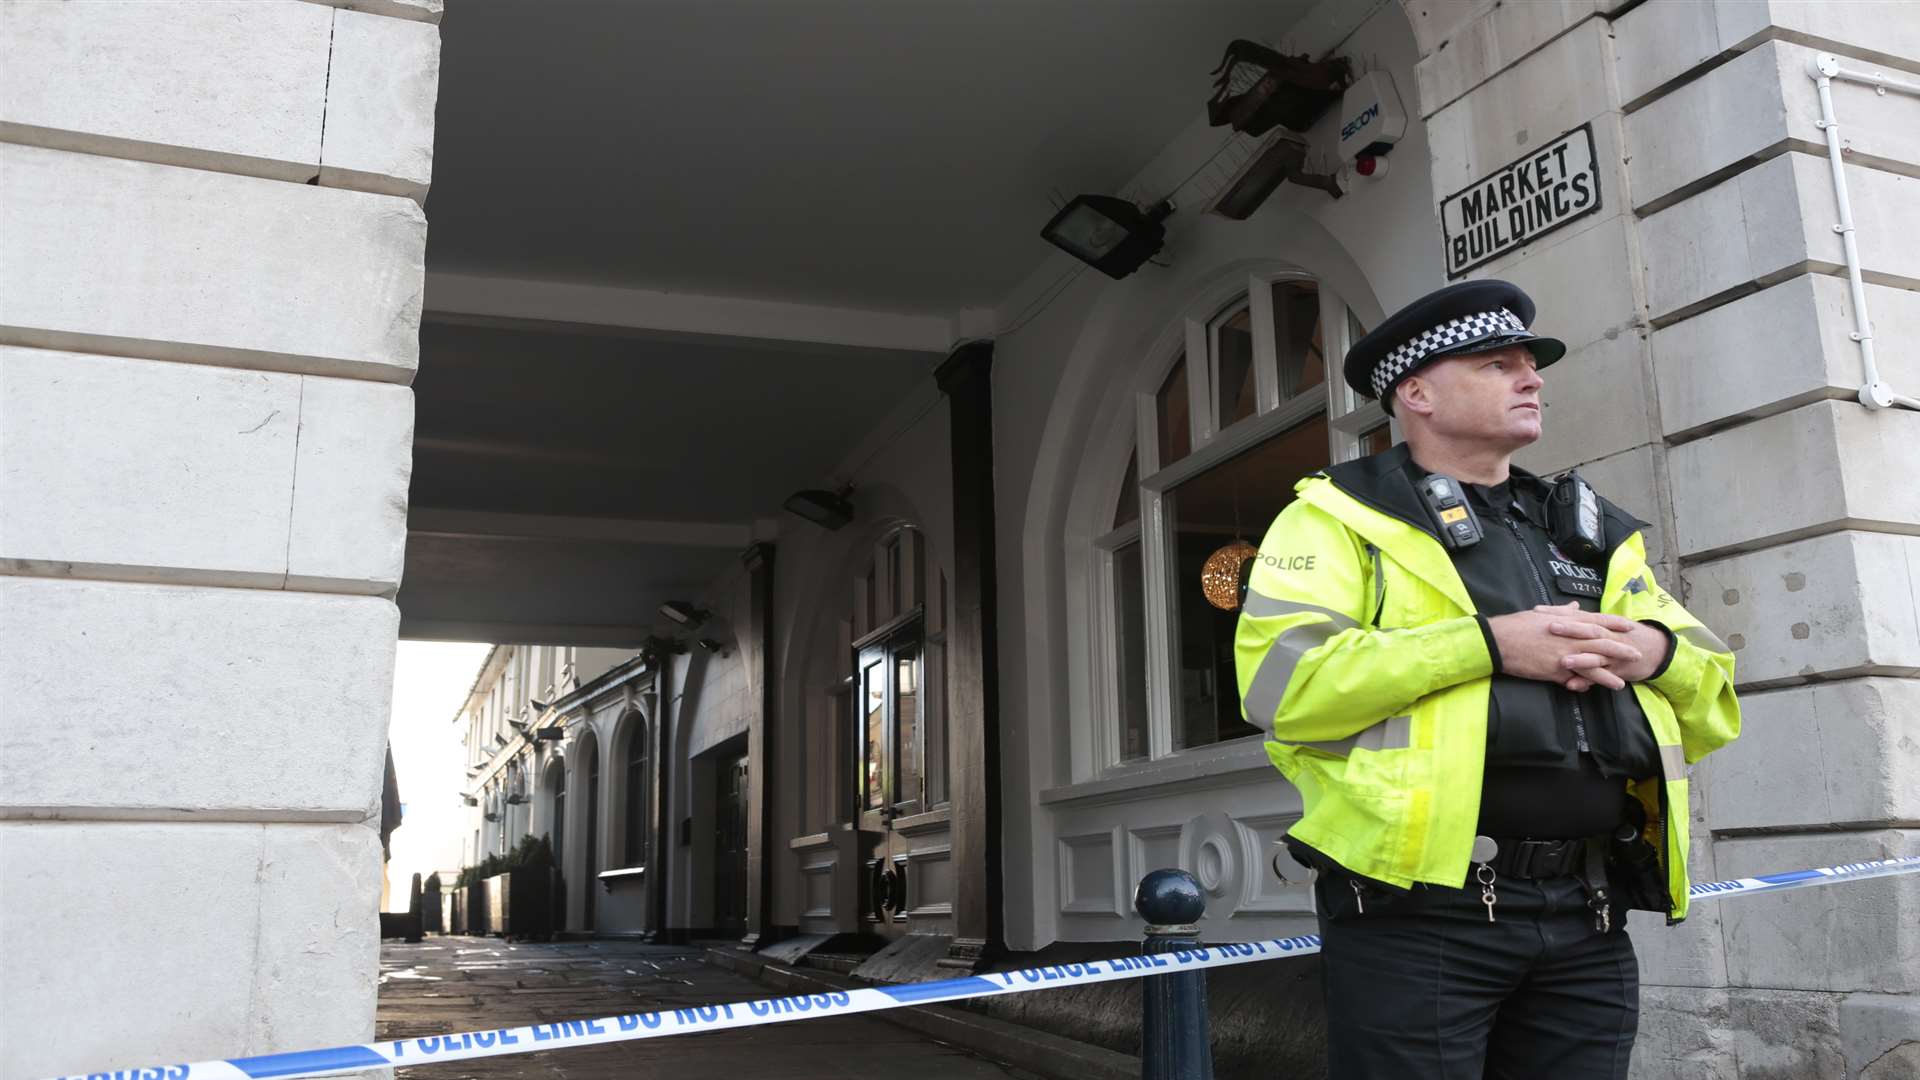 Market Buildings was cordoned off at 7.30am this morning following an alleged sexual assault